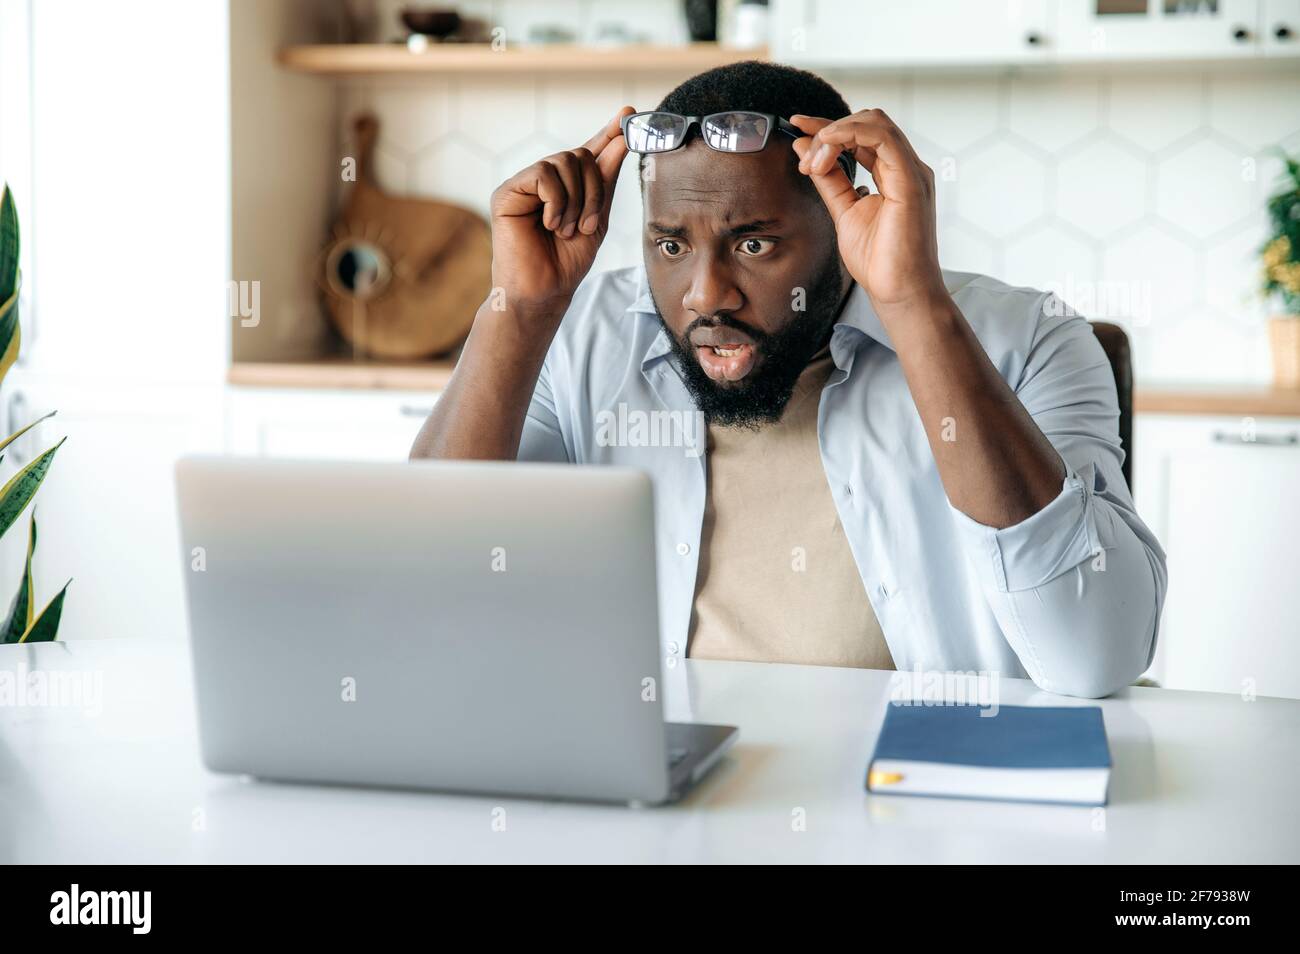 Amazed bewildered African American bearded man, business executive, freelancer sits at his desk, looks at his laptop in surprise while taking off glasses, reads unexpected news or message Stock Photo